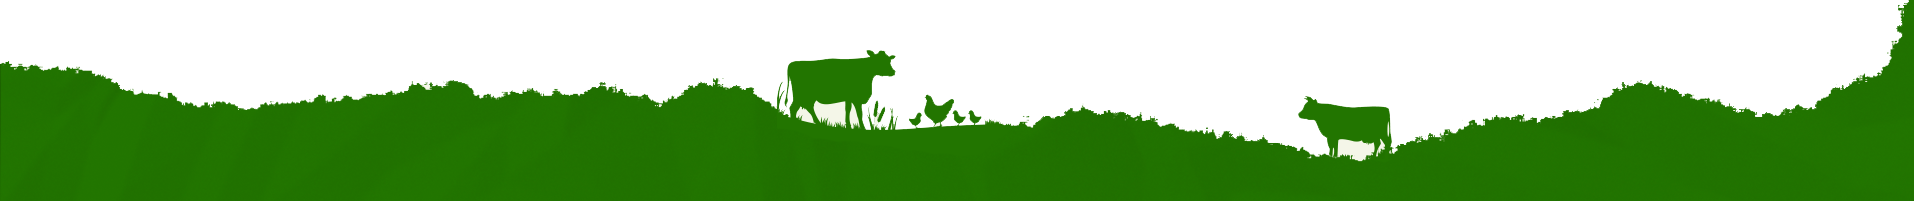 A green image of some cows on grass.